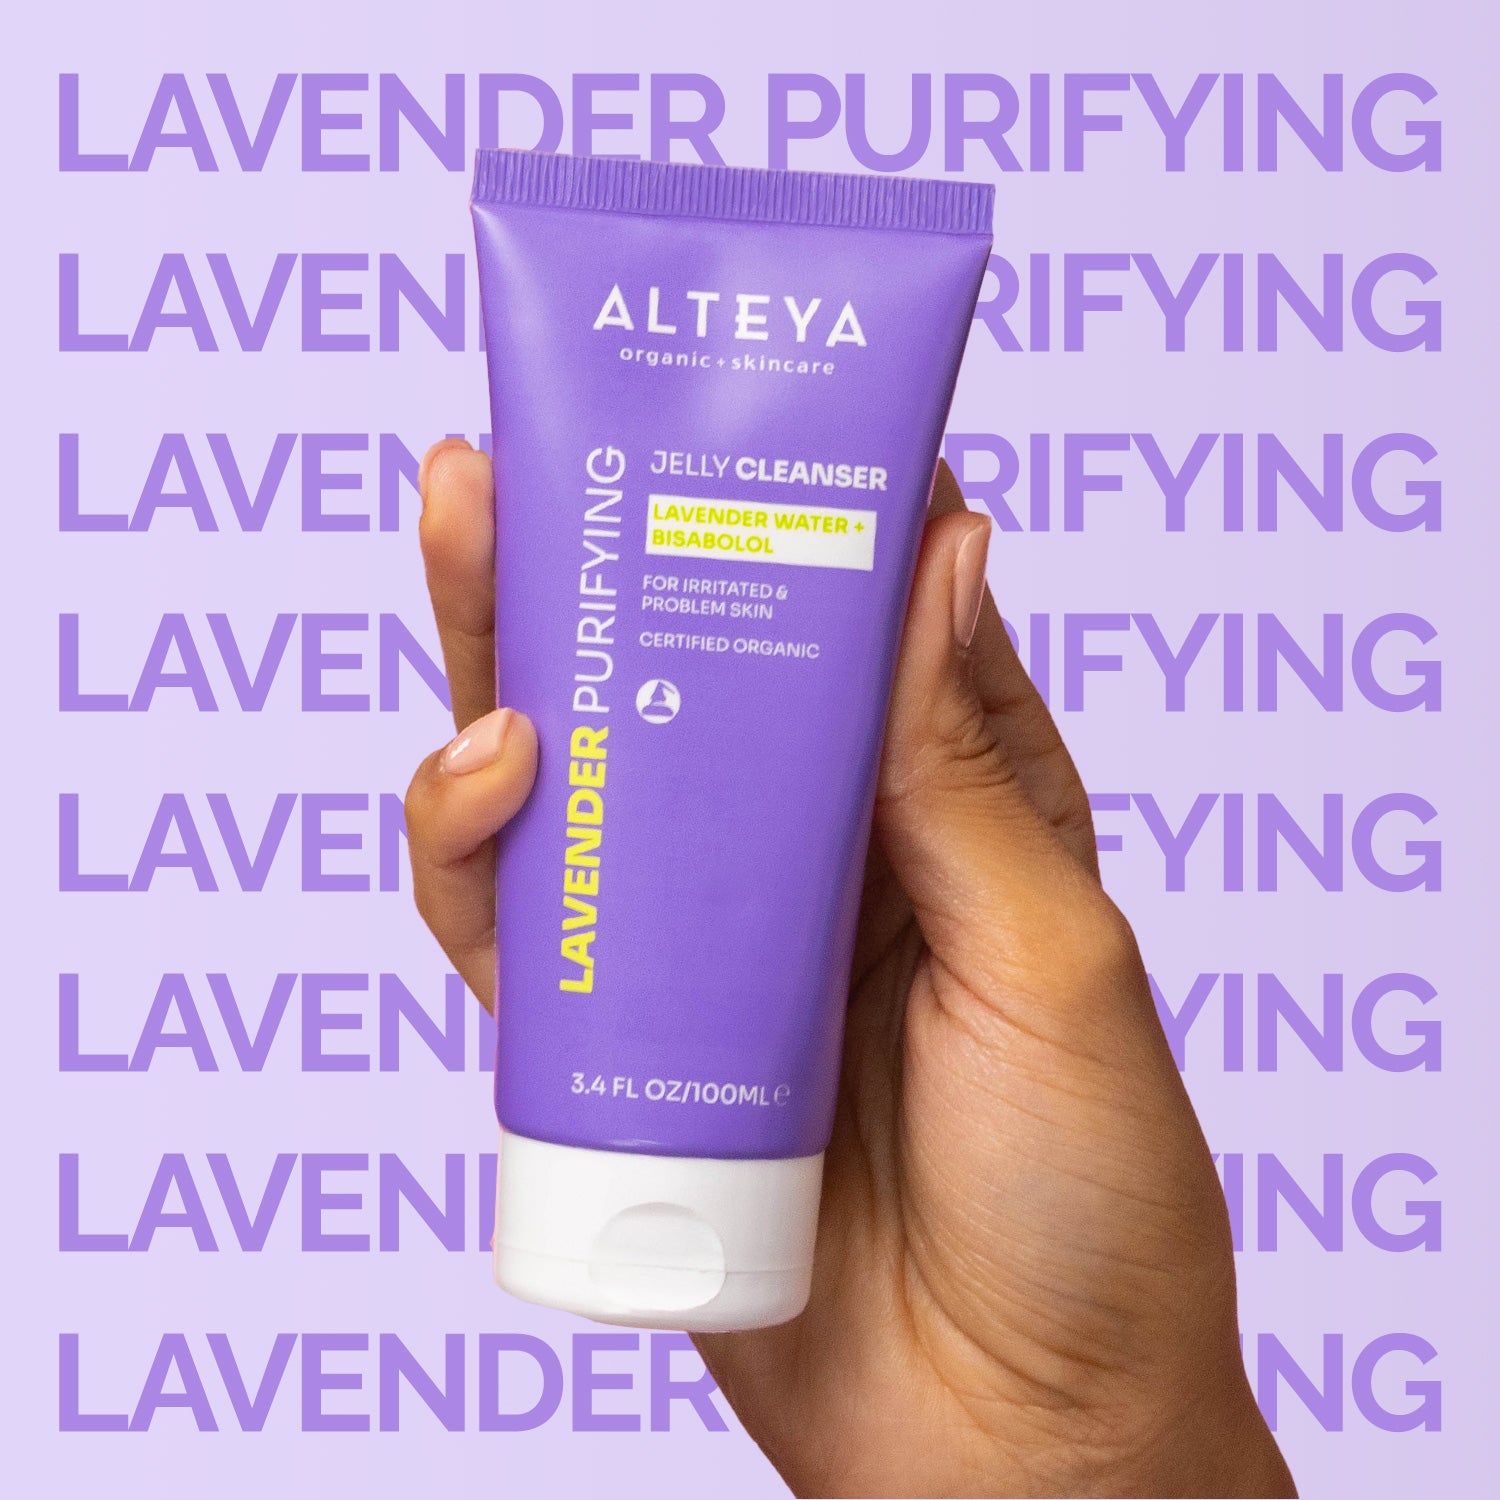 Lavender Purifying Jelly Cleanser